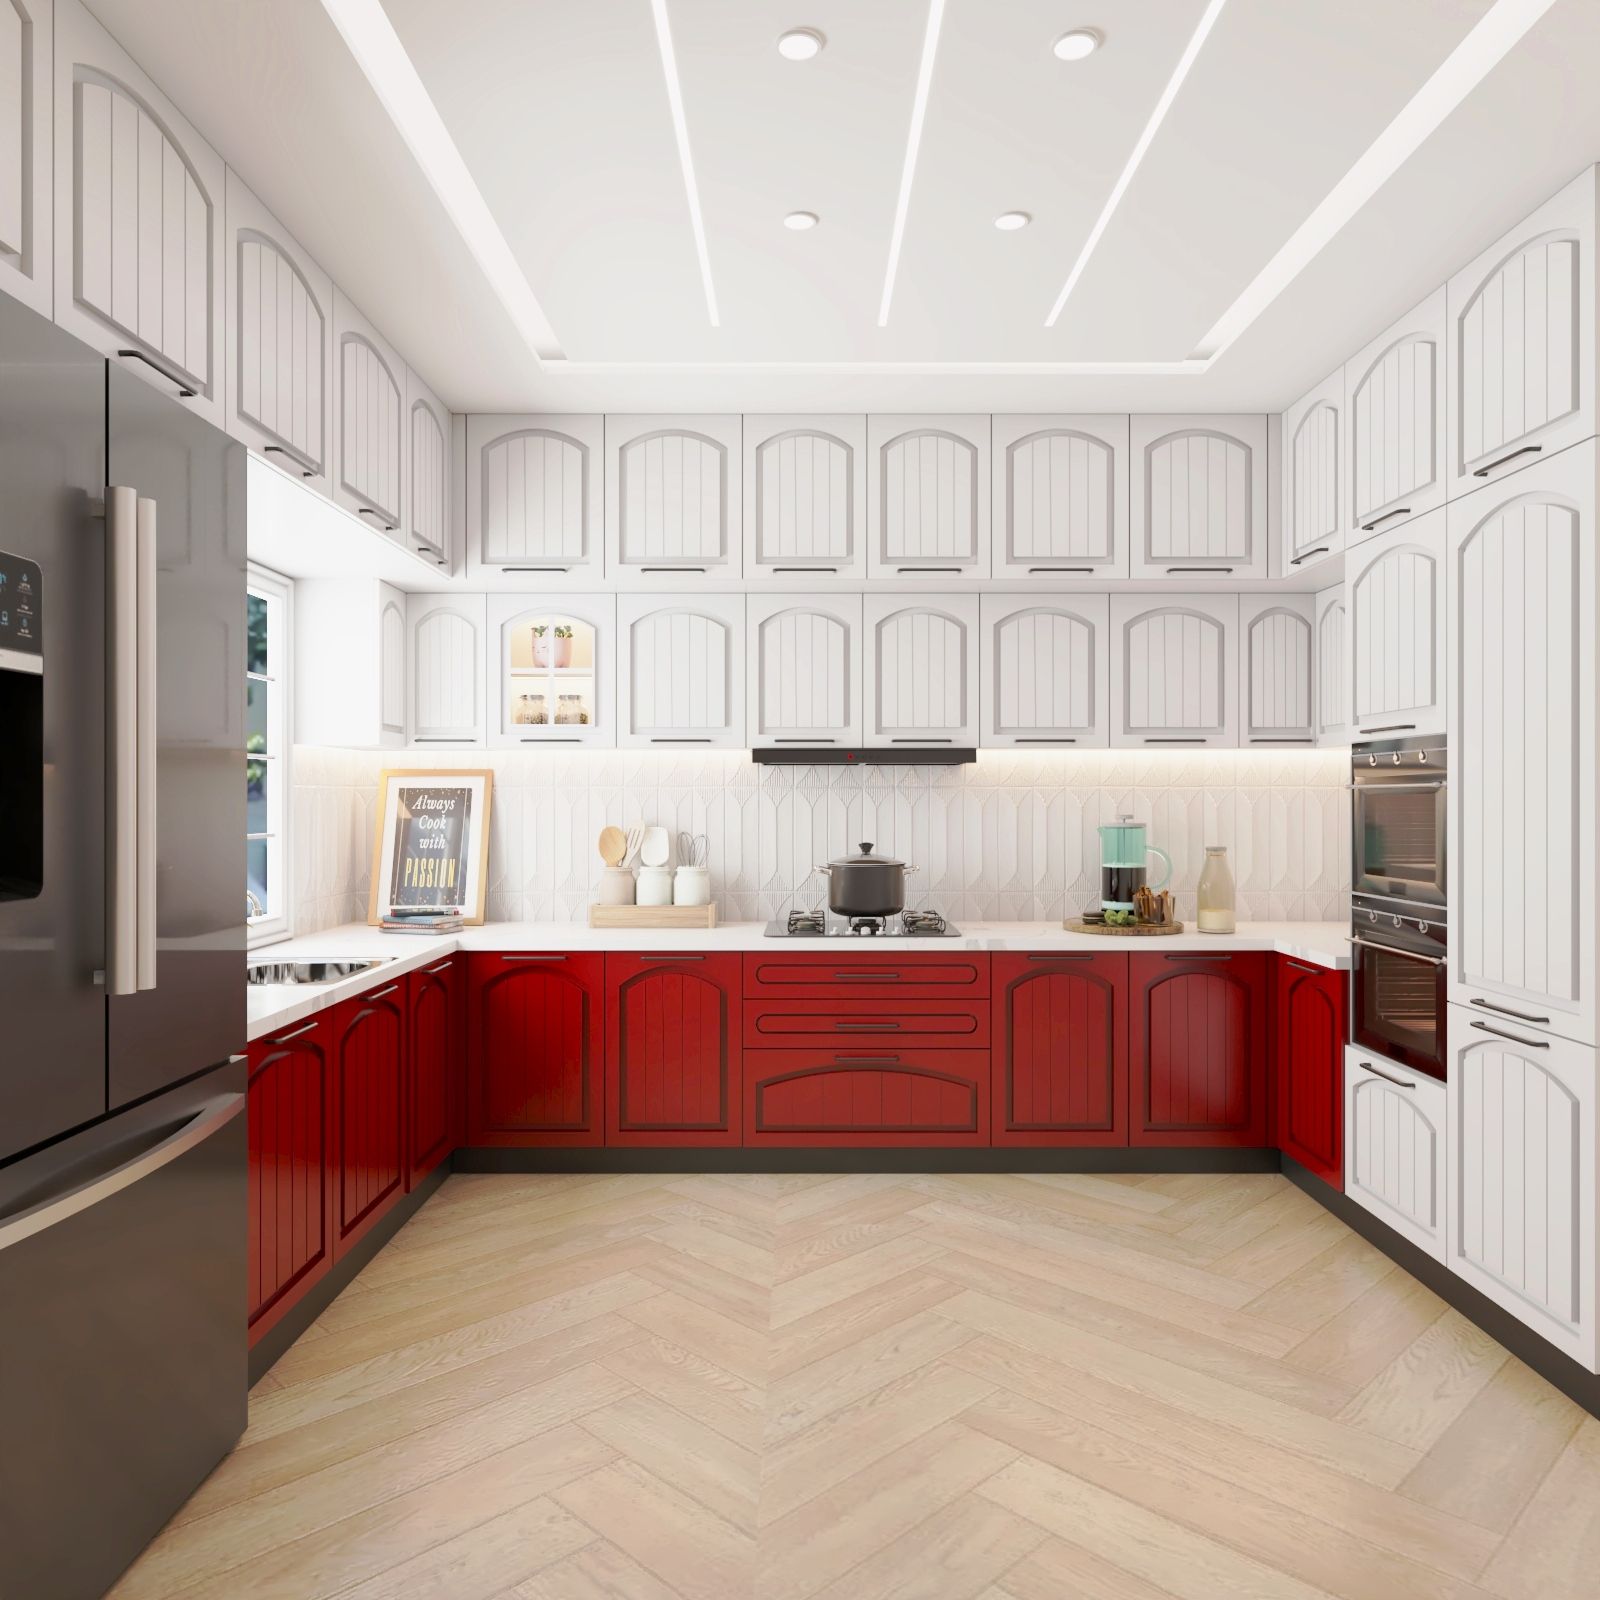 Contemporary U-Shaped Kitchen Design With Red And White Cabinets